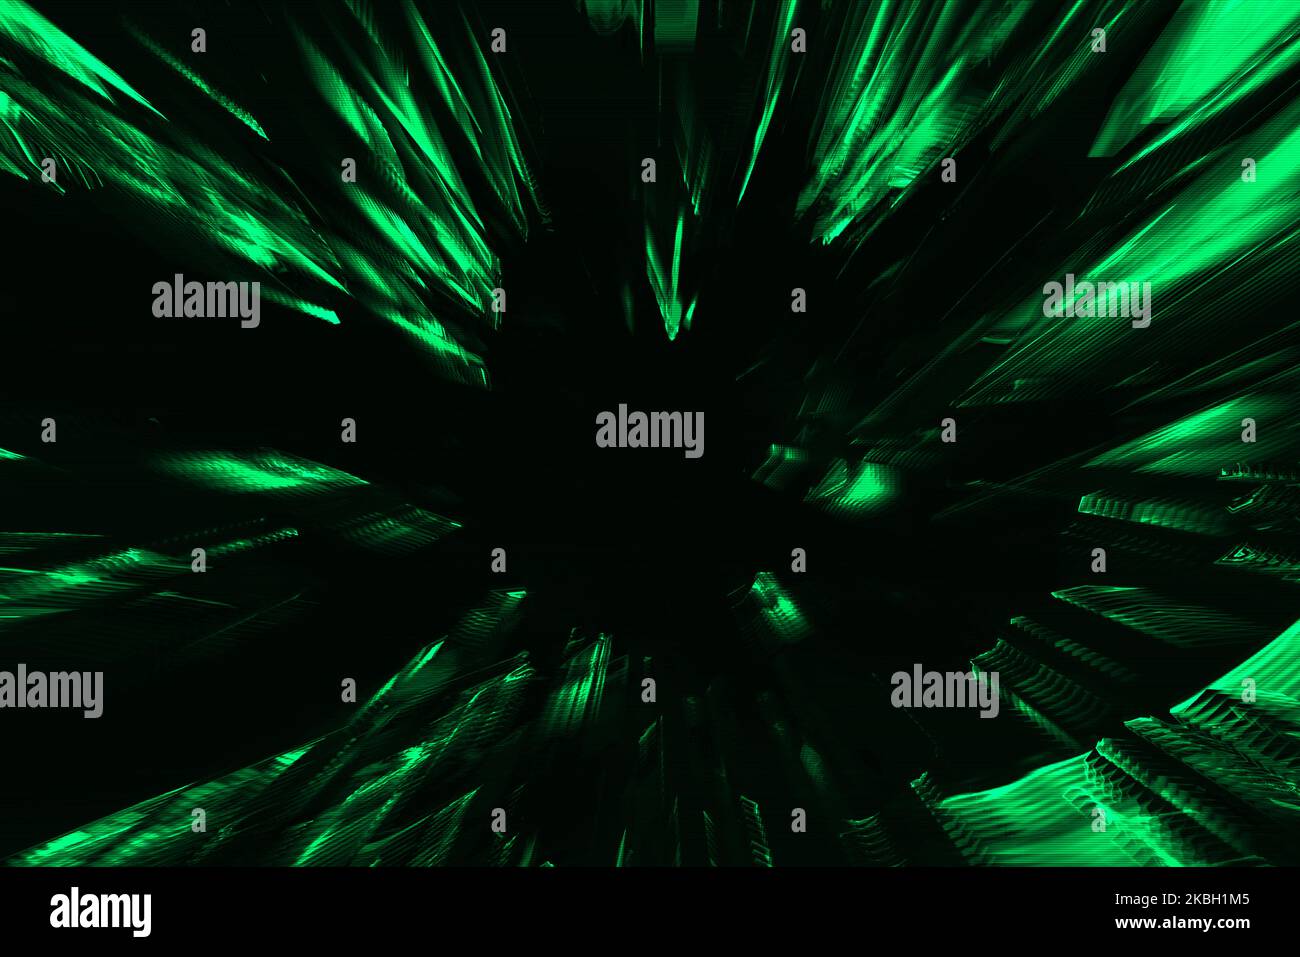 Abstract green psychedelic background interlaced digital Distorted Motion glitch effect. Futuristic striped cyberpunk design Retro webpunk, rave 90s a Stock Photo